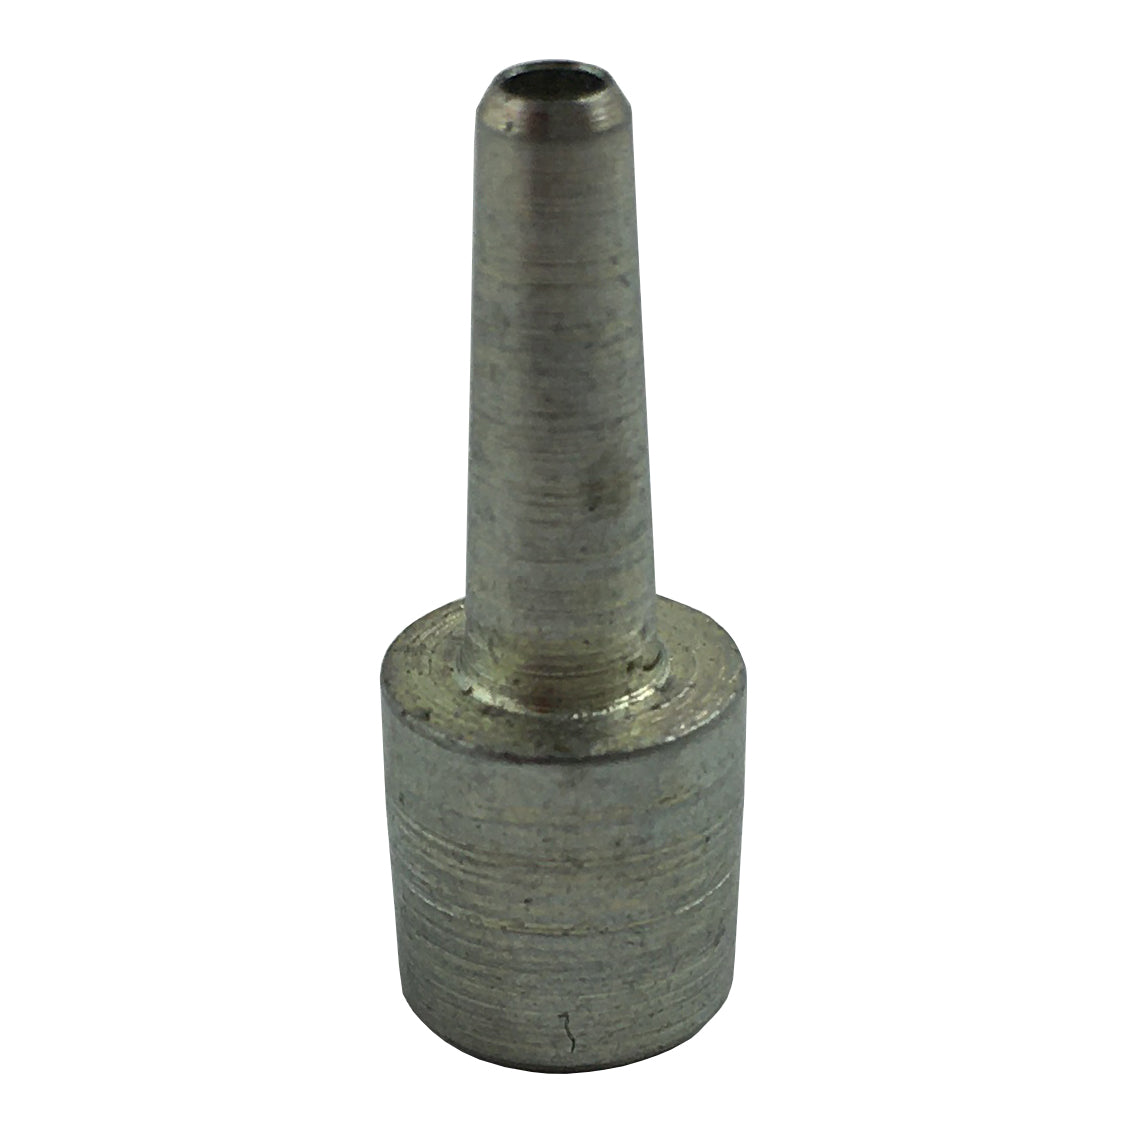 Maun Wad REPLACEMENT Punch 2.8mm 7/64" #3